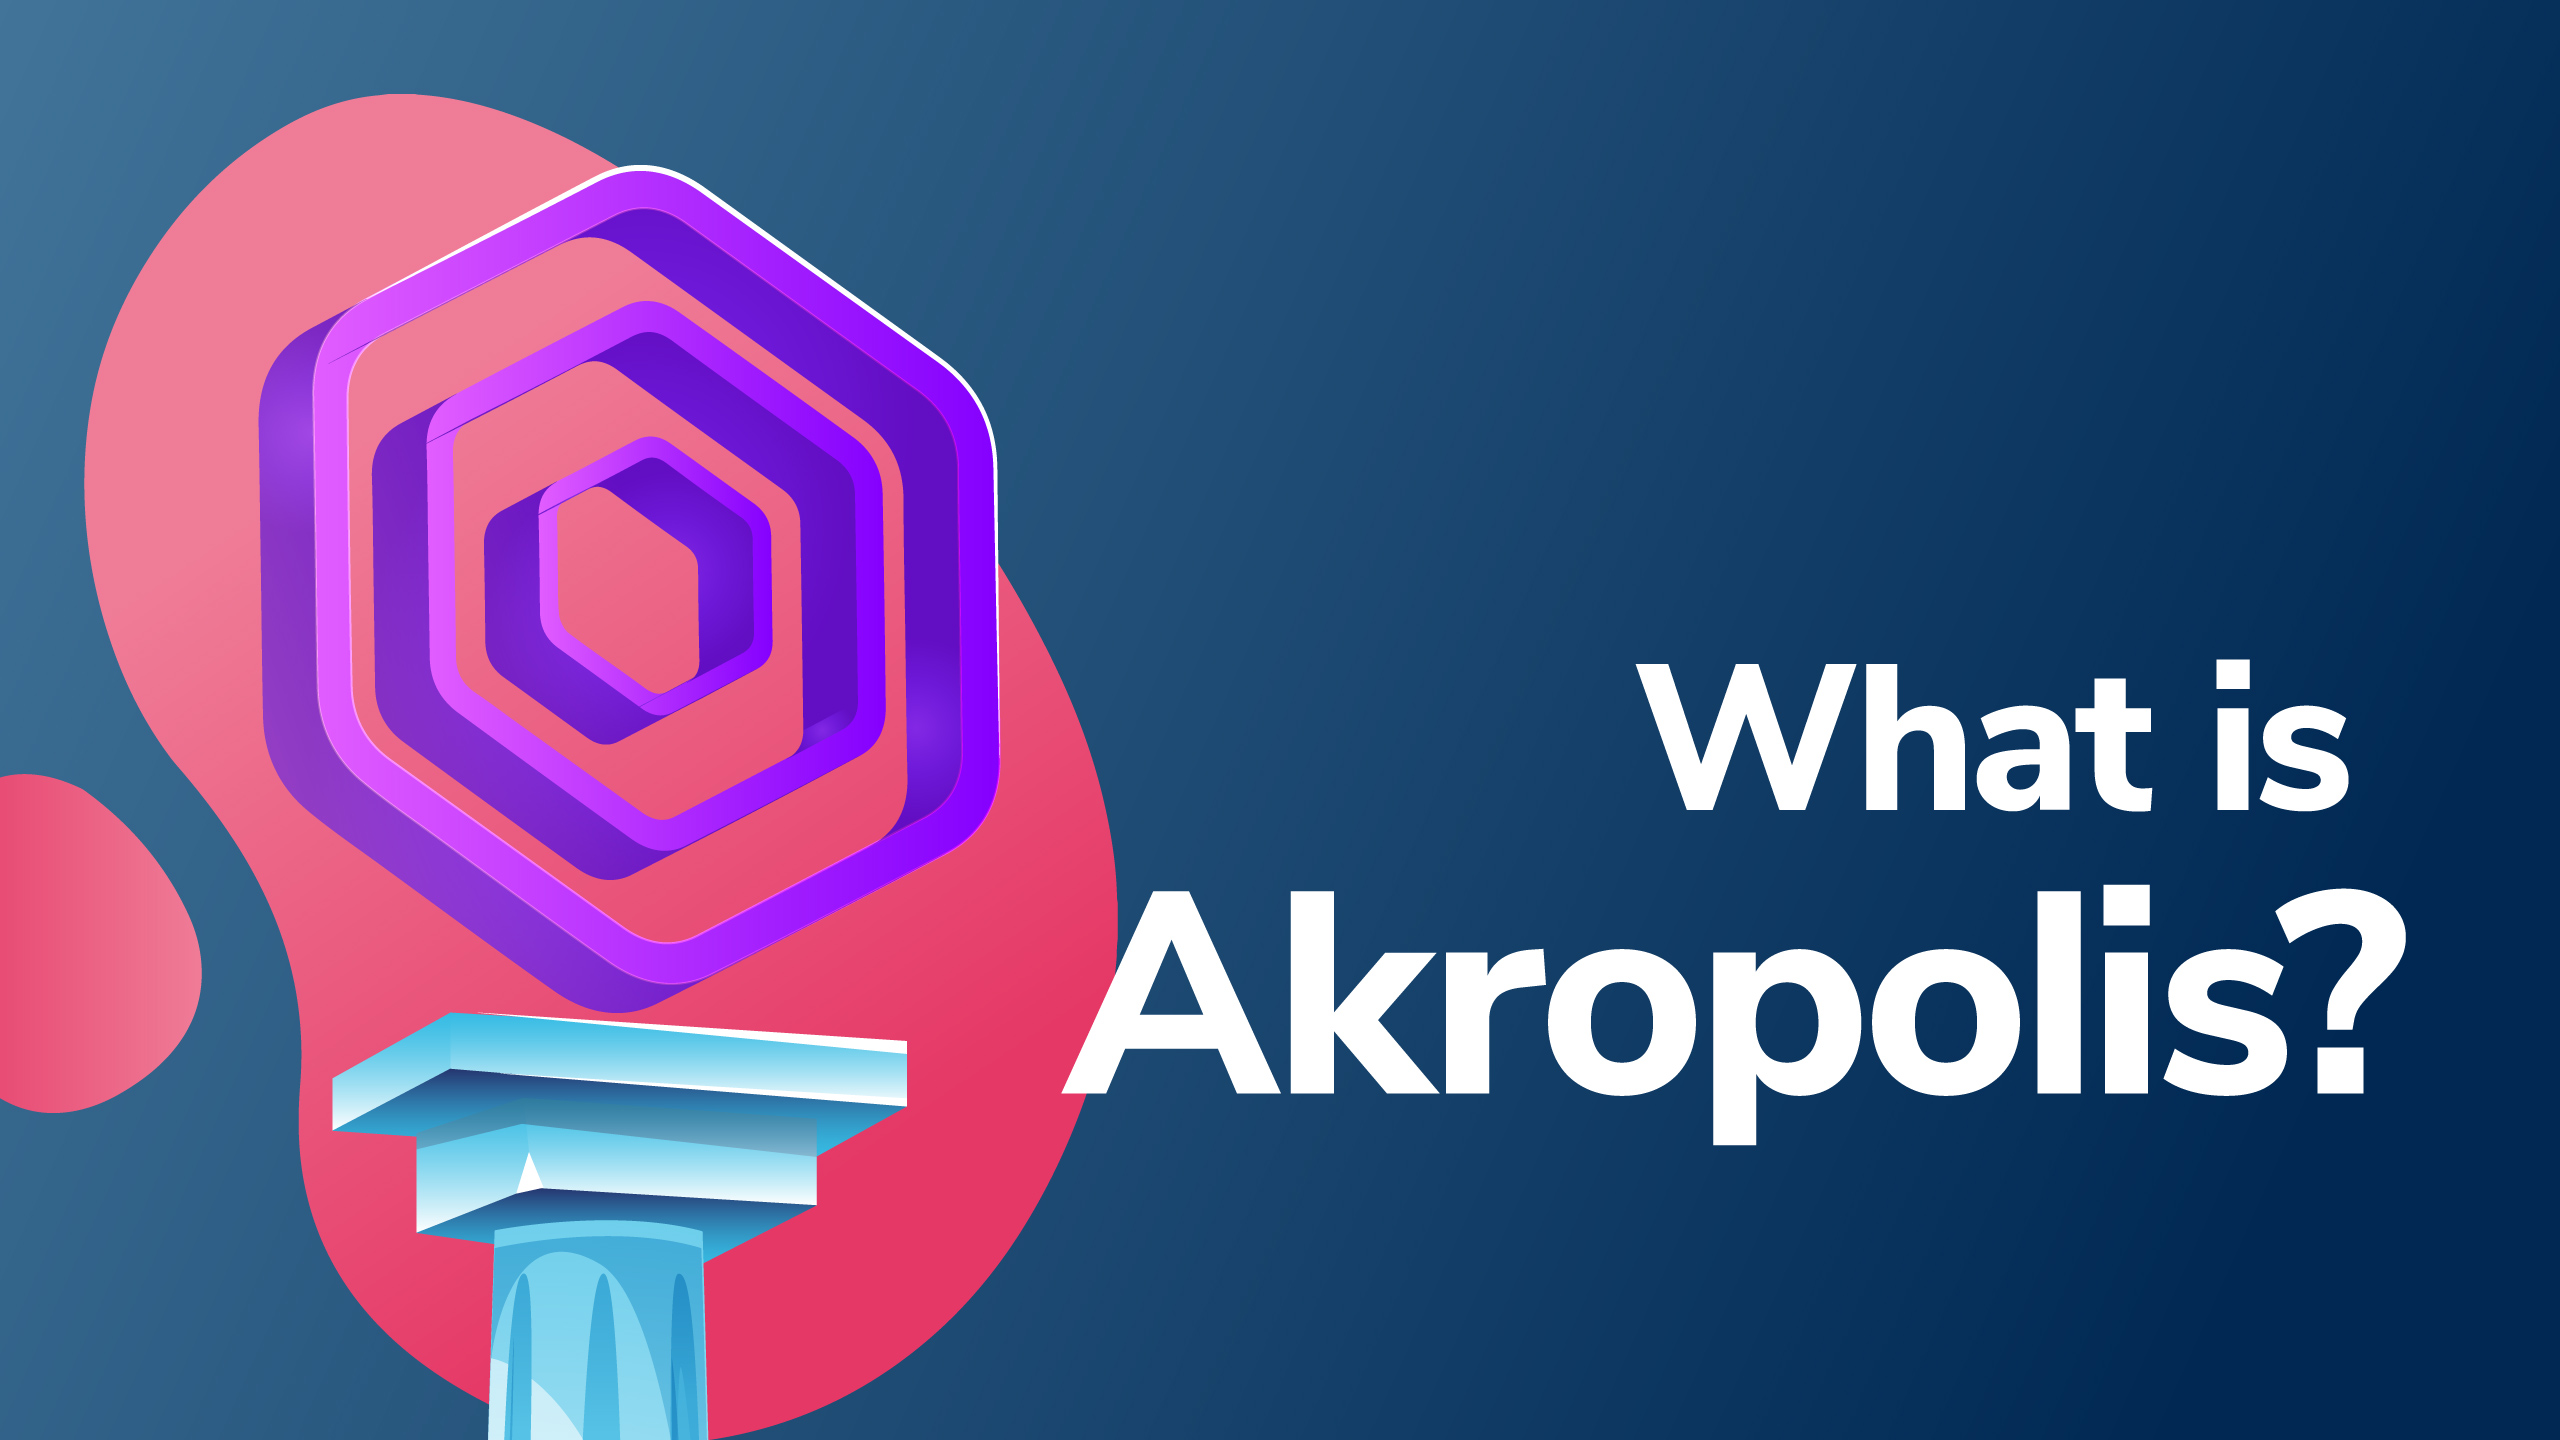 https://academy.moralis.io/wp-content/uploads/2021/06/What-is-Akropolis.jpg